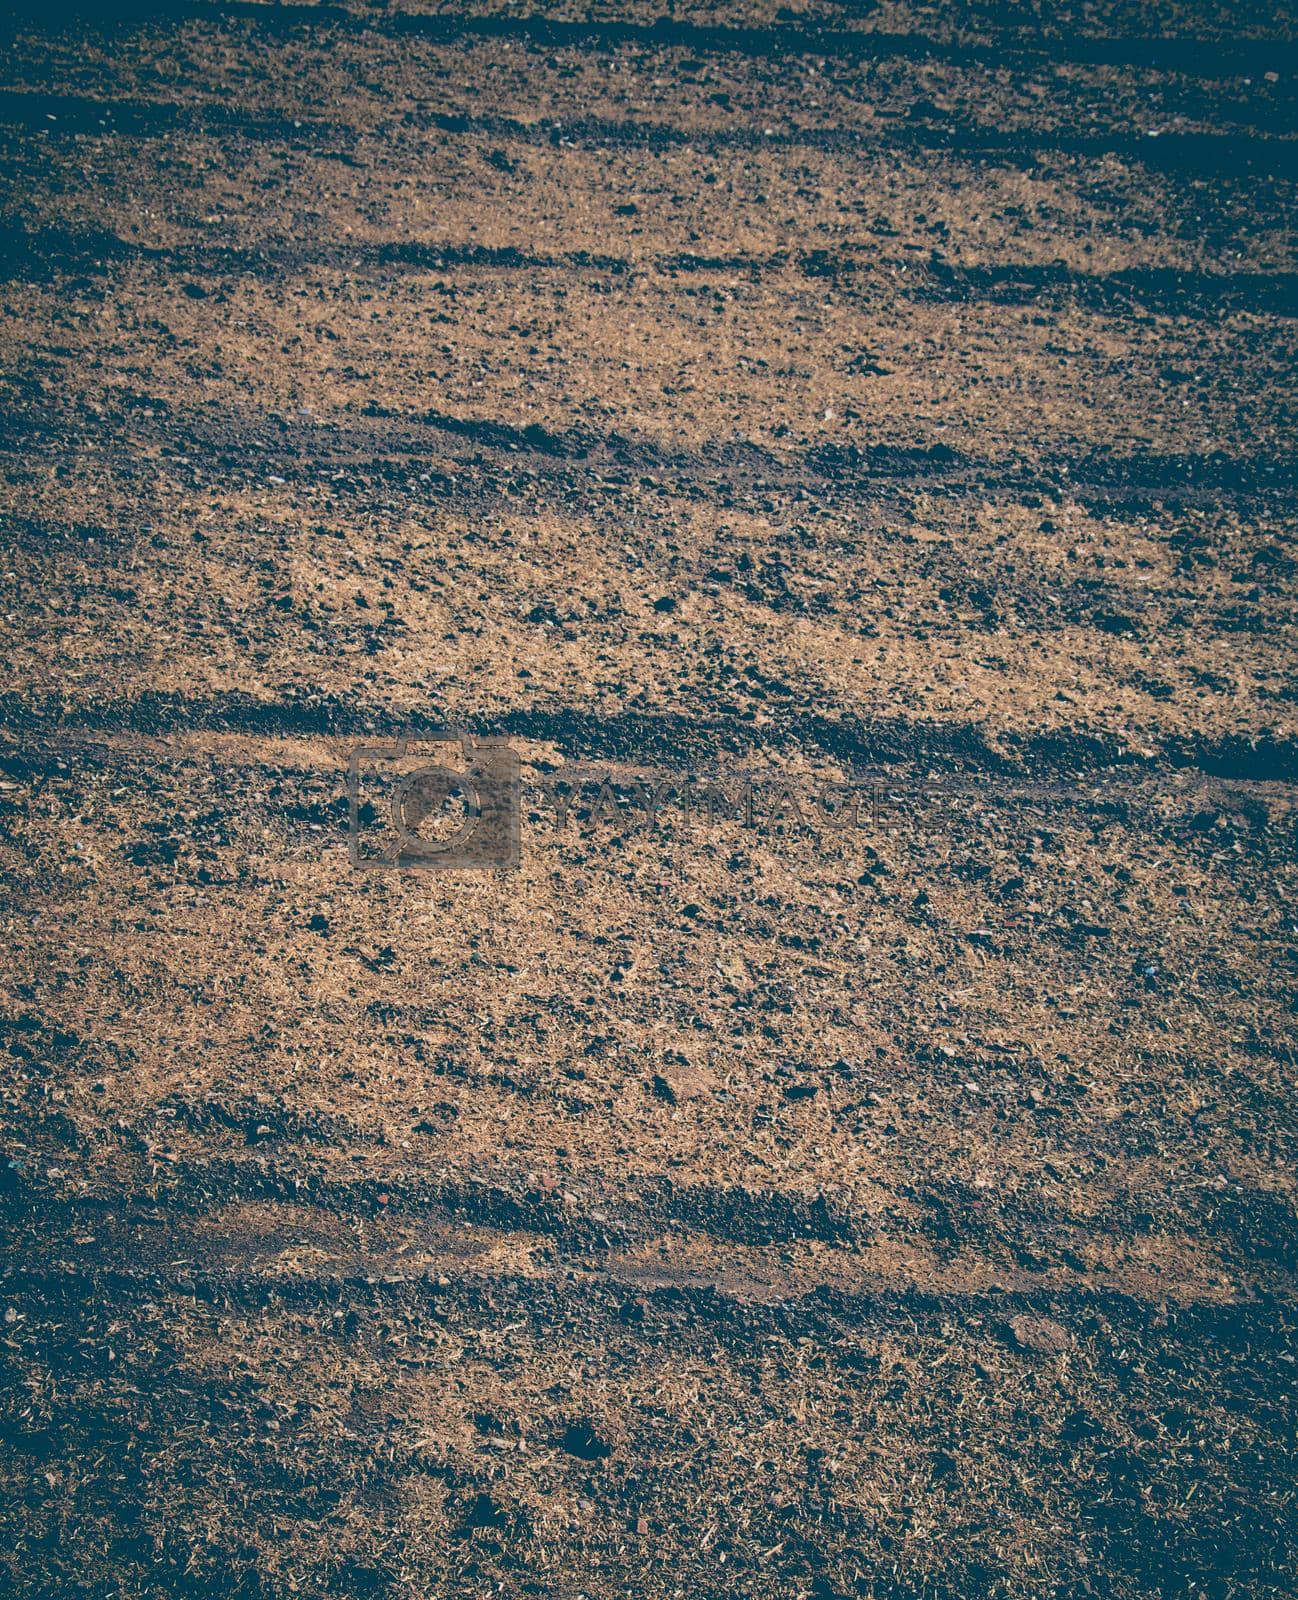 Royalty free image of Plowed field with  traces in view by berkay